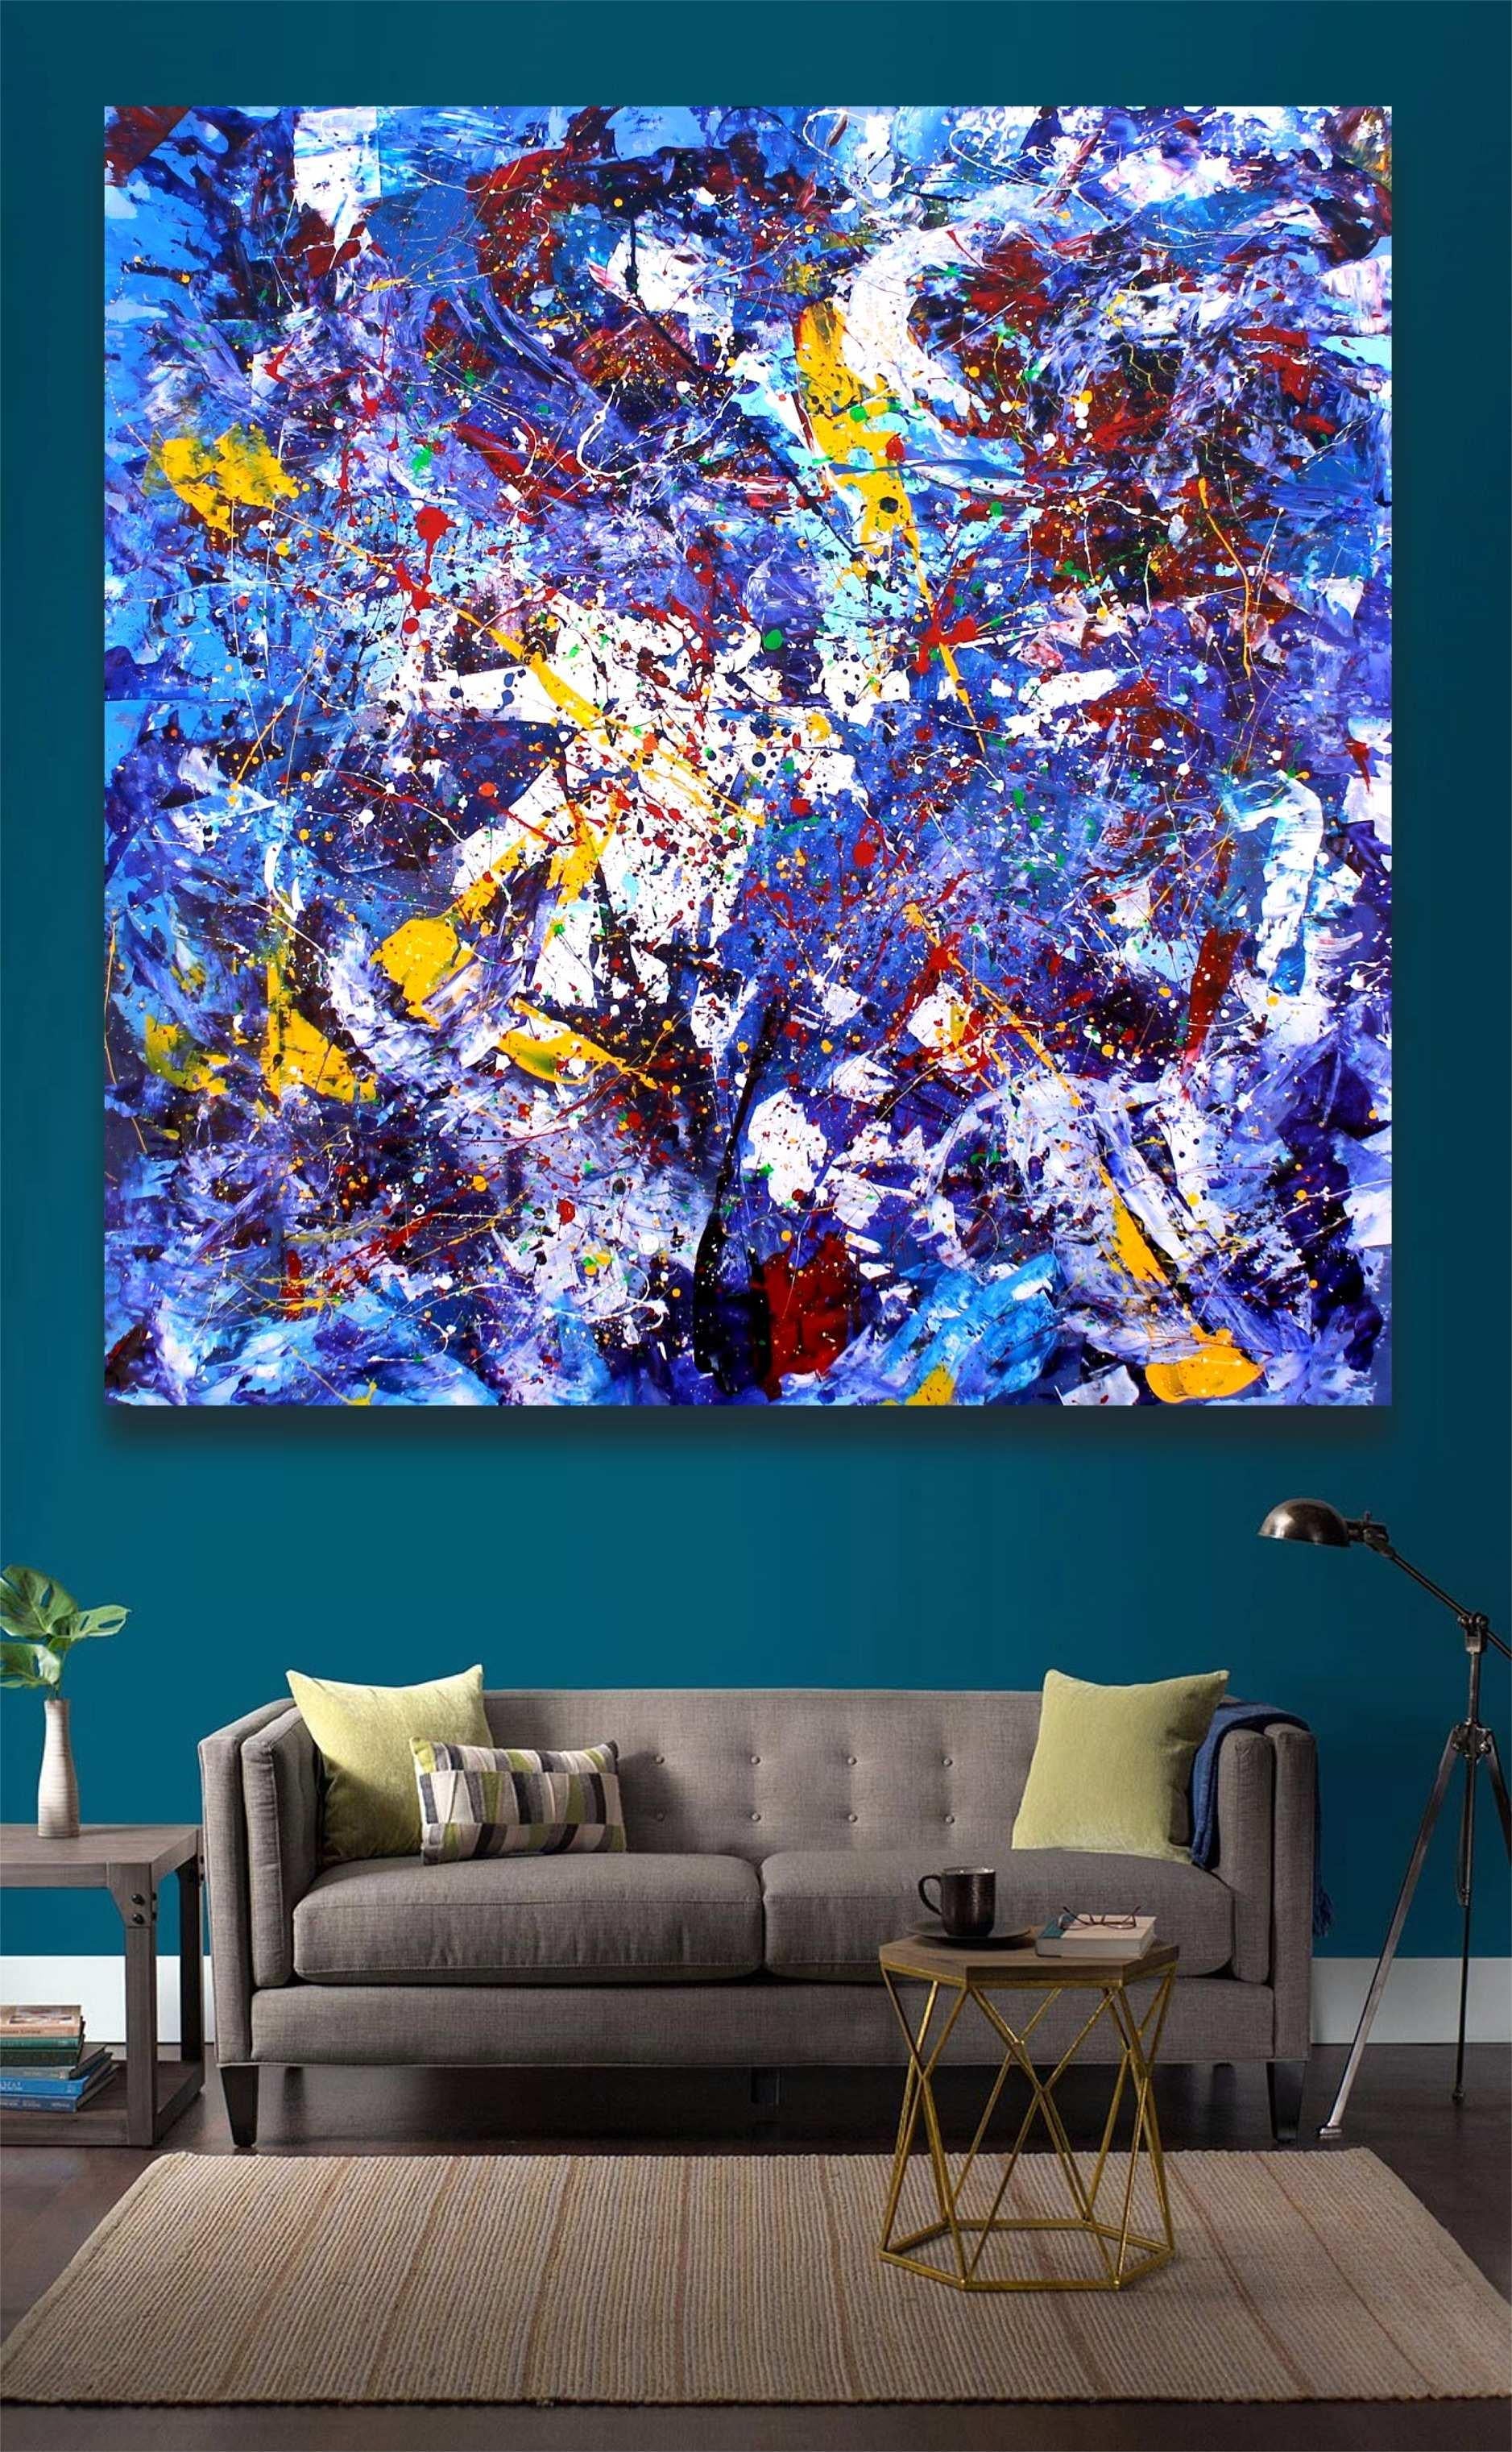 Abstract Woman of Colors Emotions - Abstract Expressionist Painting by Juan Jose Garay